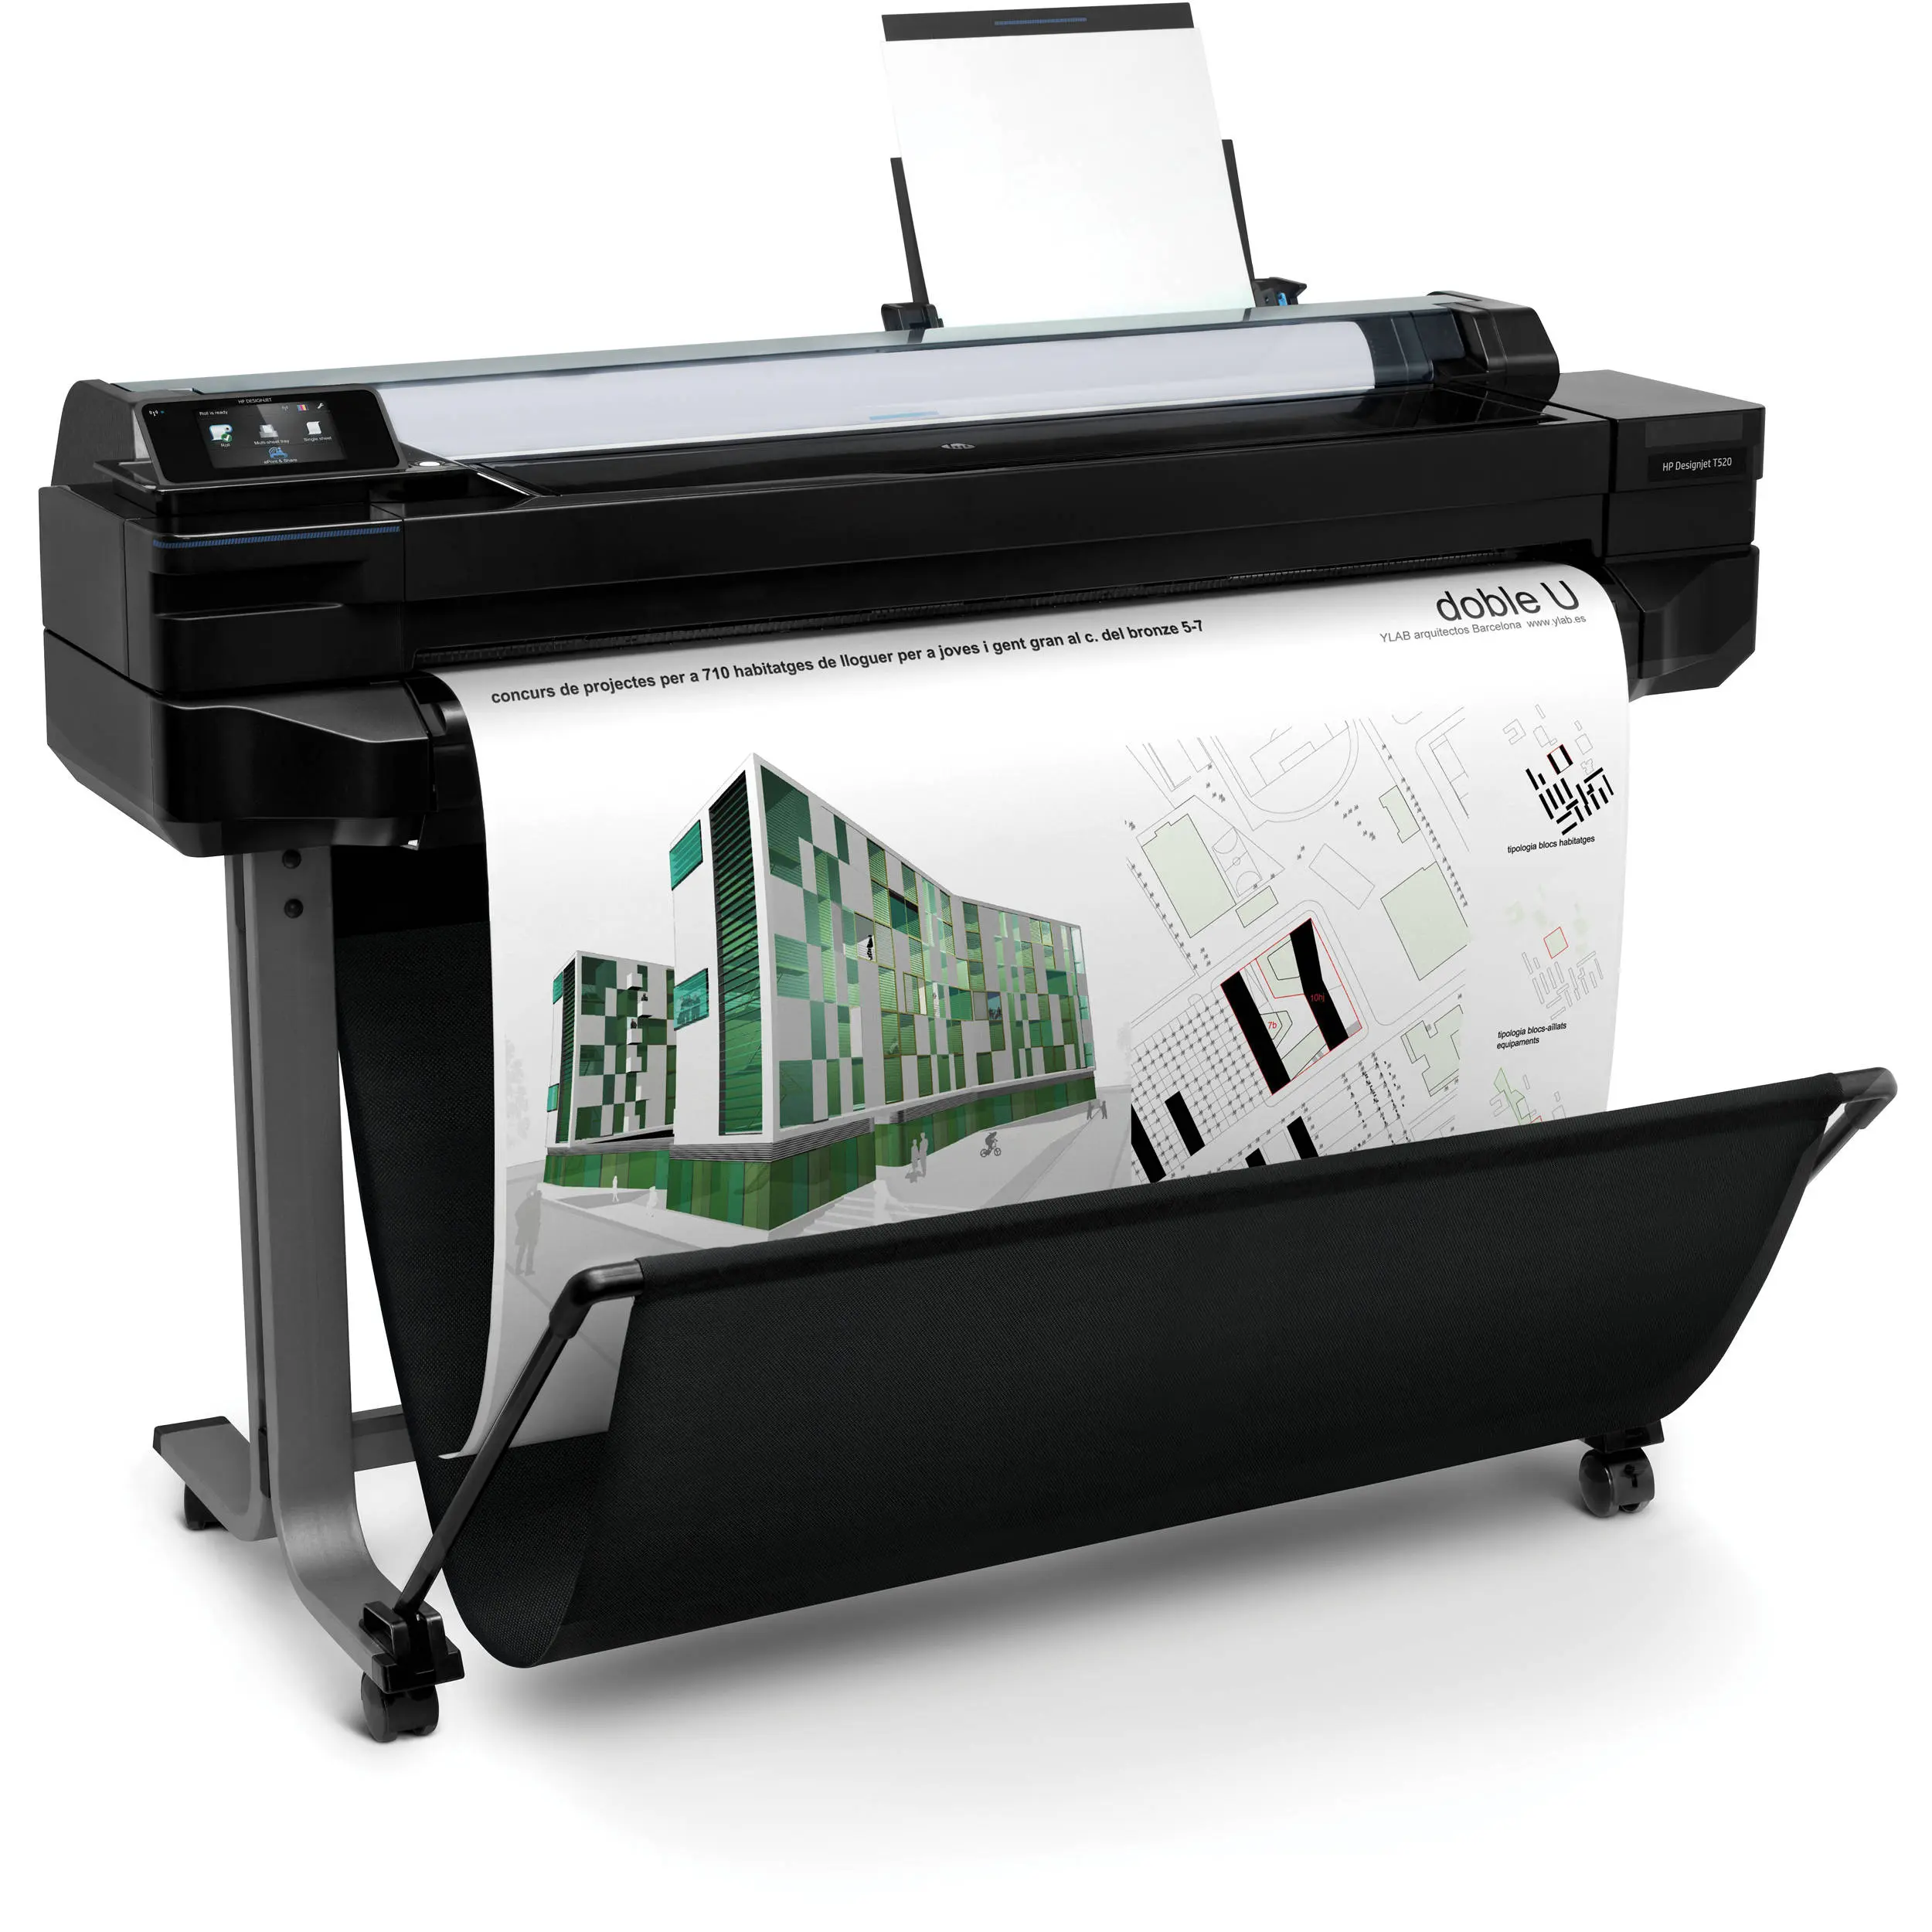 Compact and powerful: hp designjet t520 24 for high-quality prints